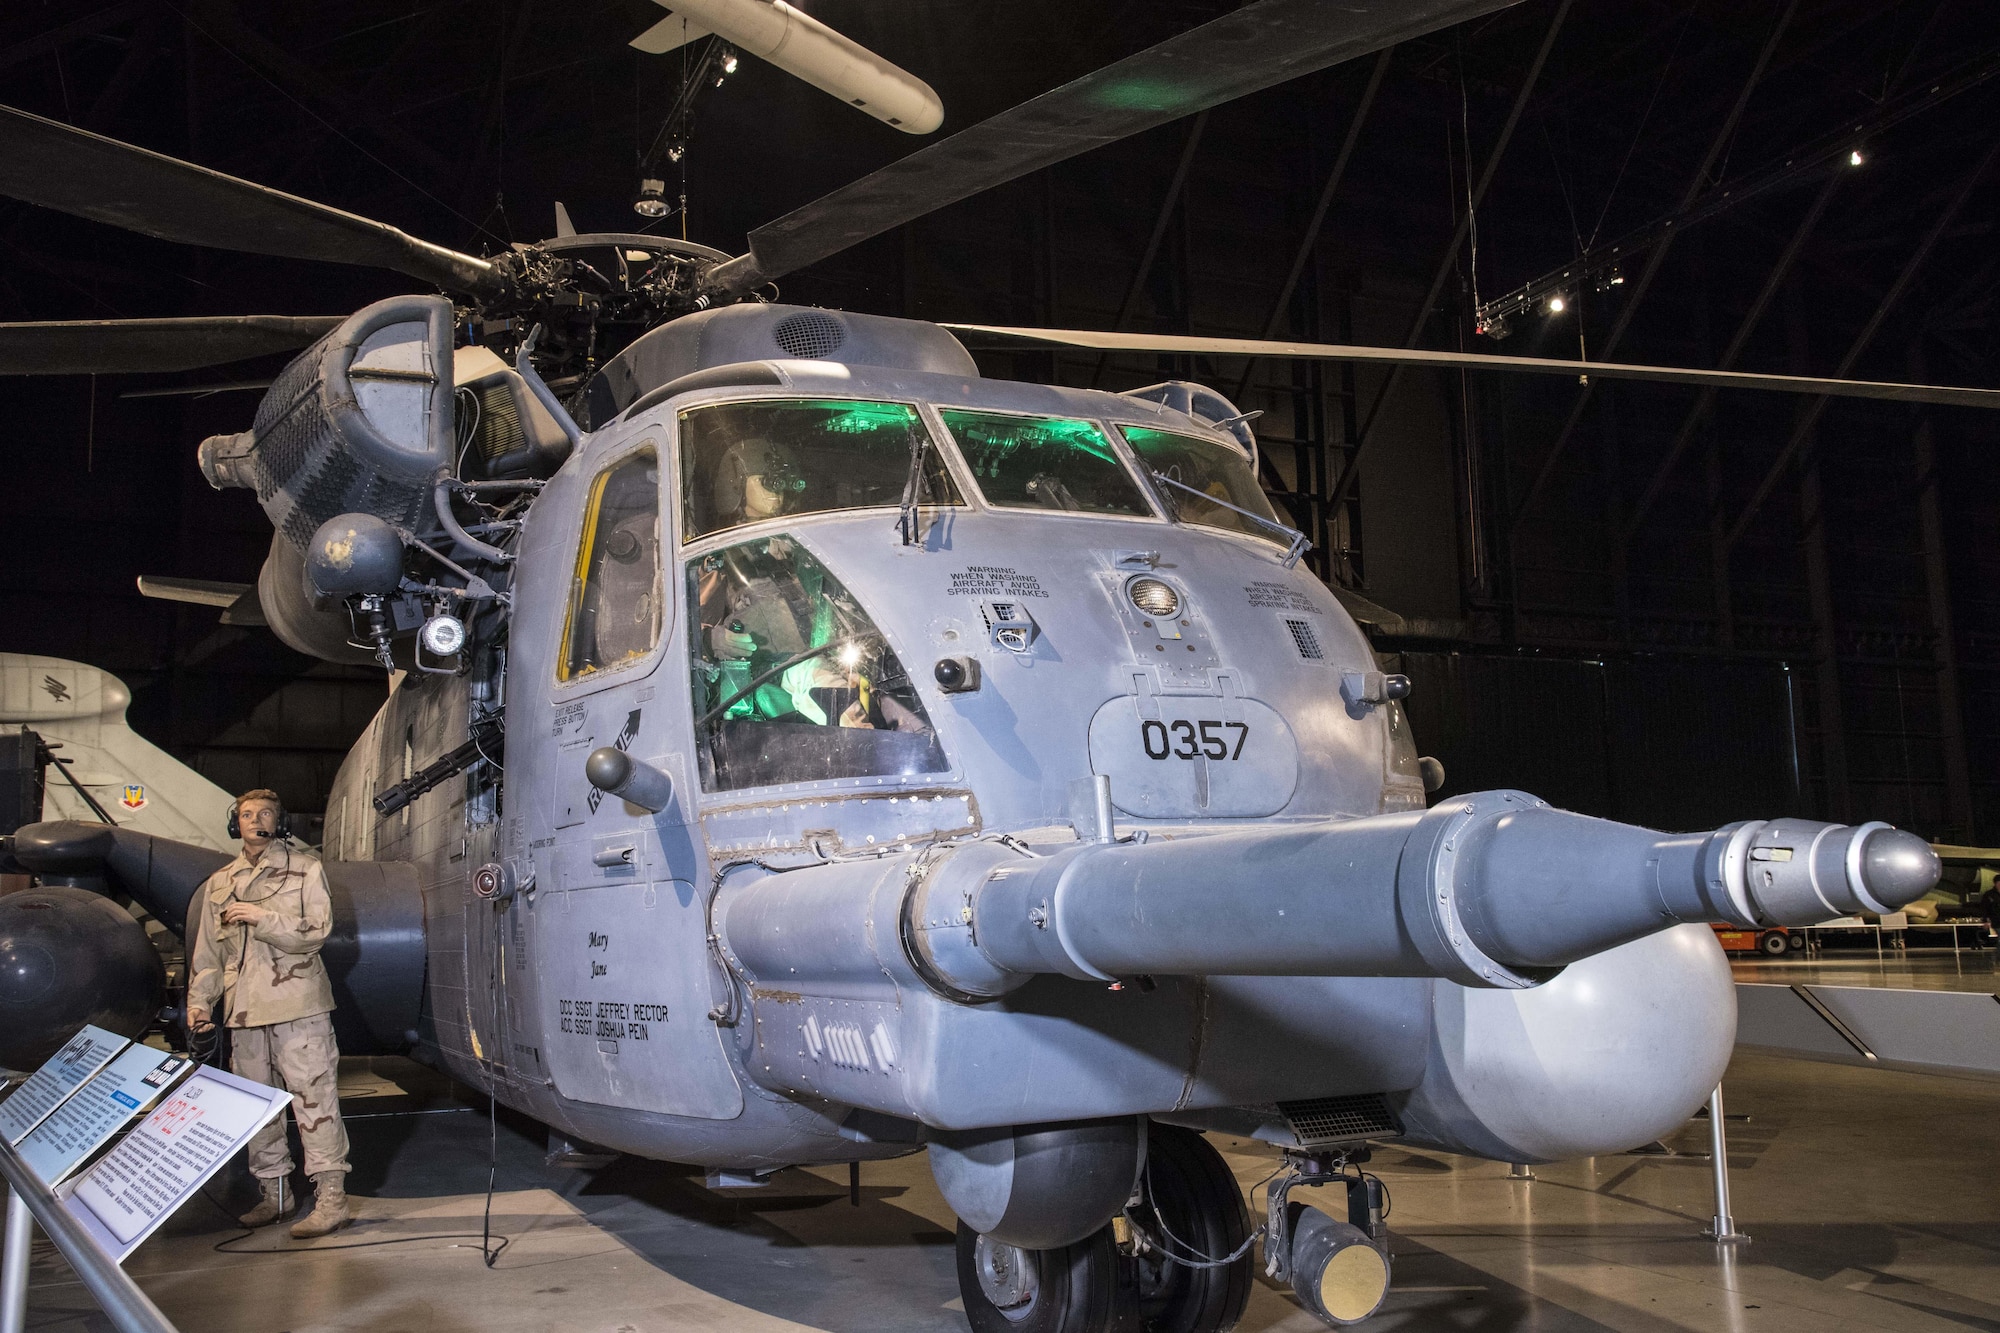 DAYTON, Ohio - Sikorsky MH-53M Pave Low IV on display in the Cold War Gallery at the National Museum of the U.S. Air Force. (U.S. Air Force photo by Ken LaRock)